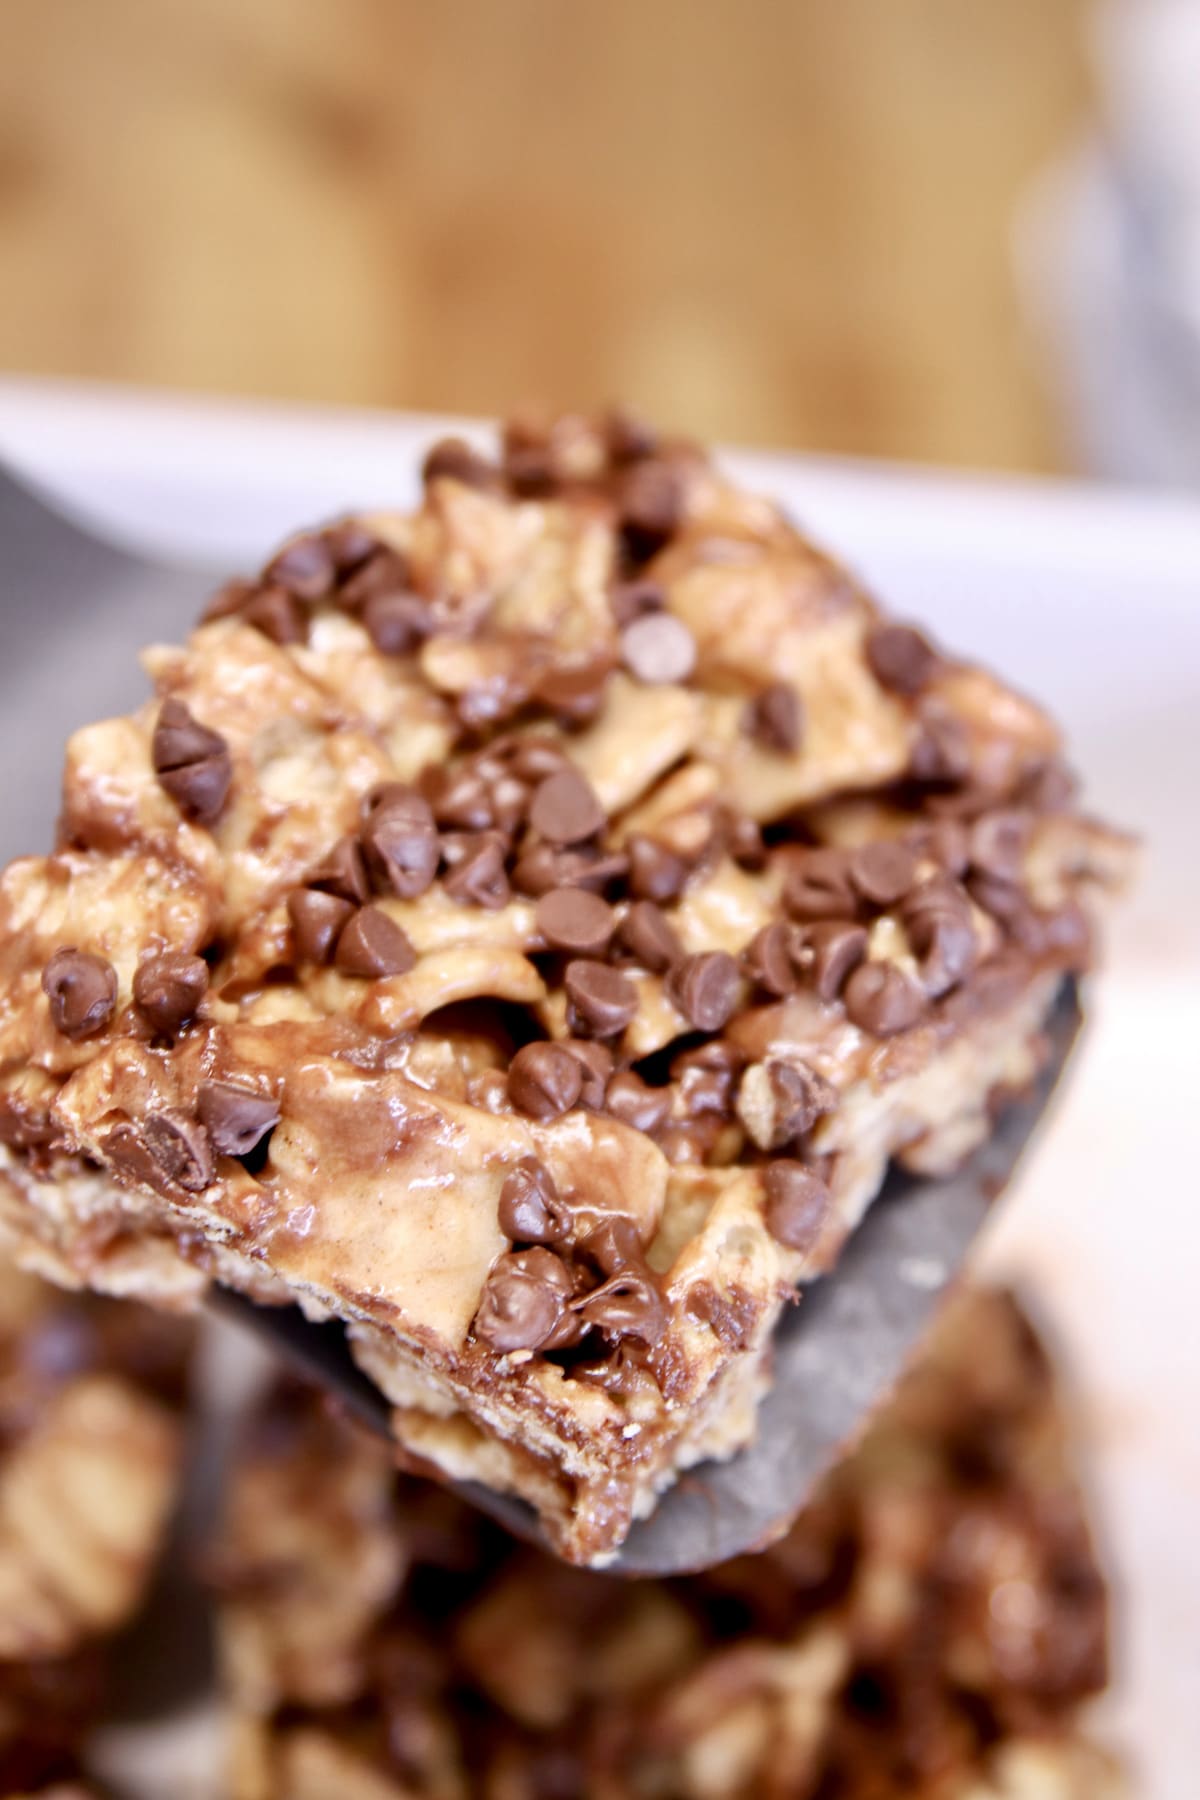 Closeup of Cinnamon Toast Crunch Bar with chocolate chips.